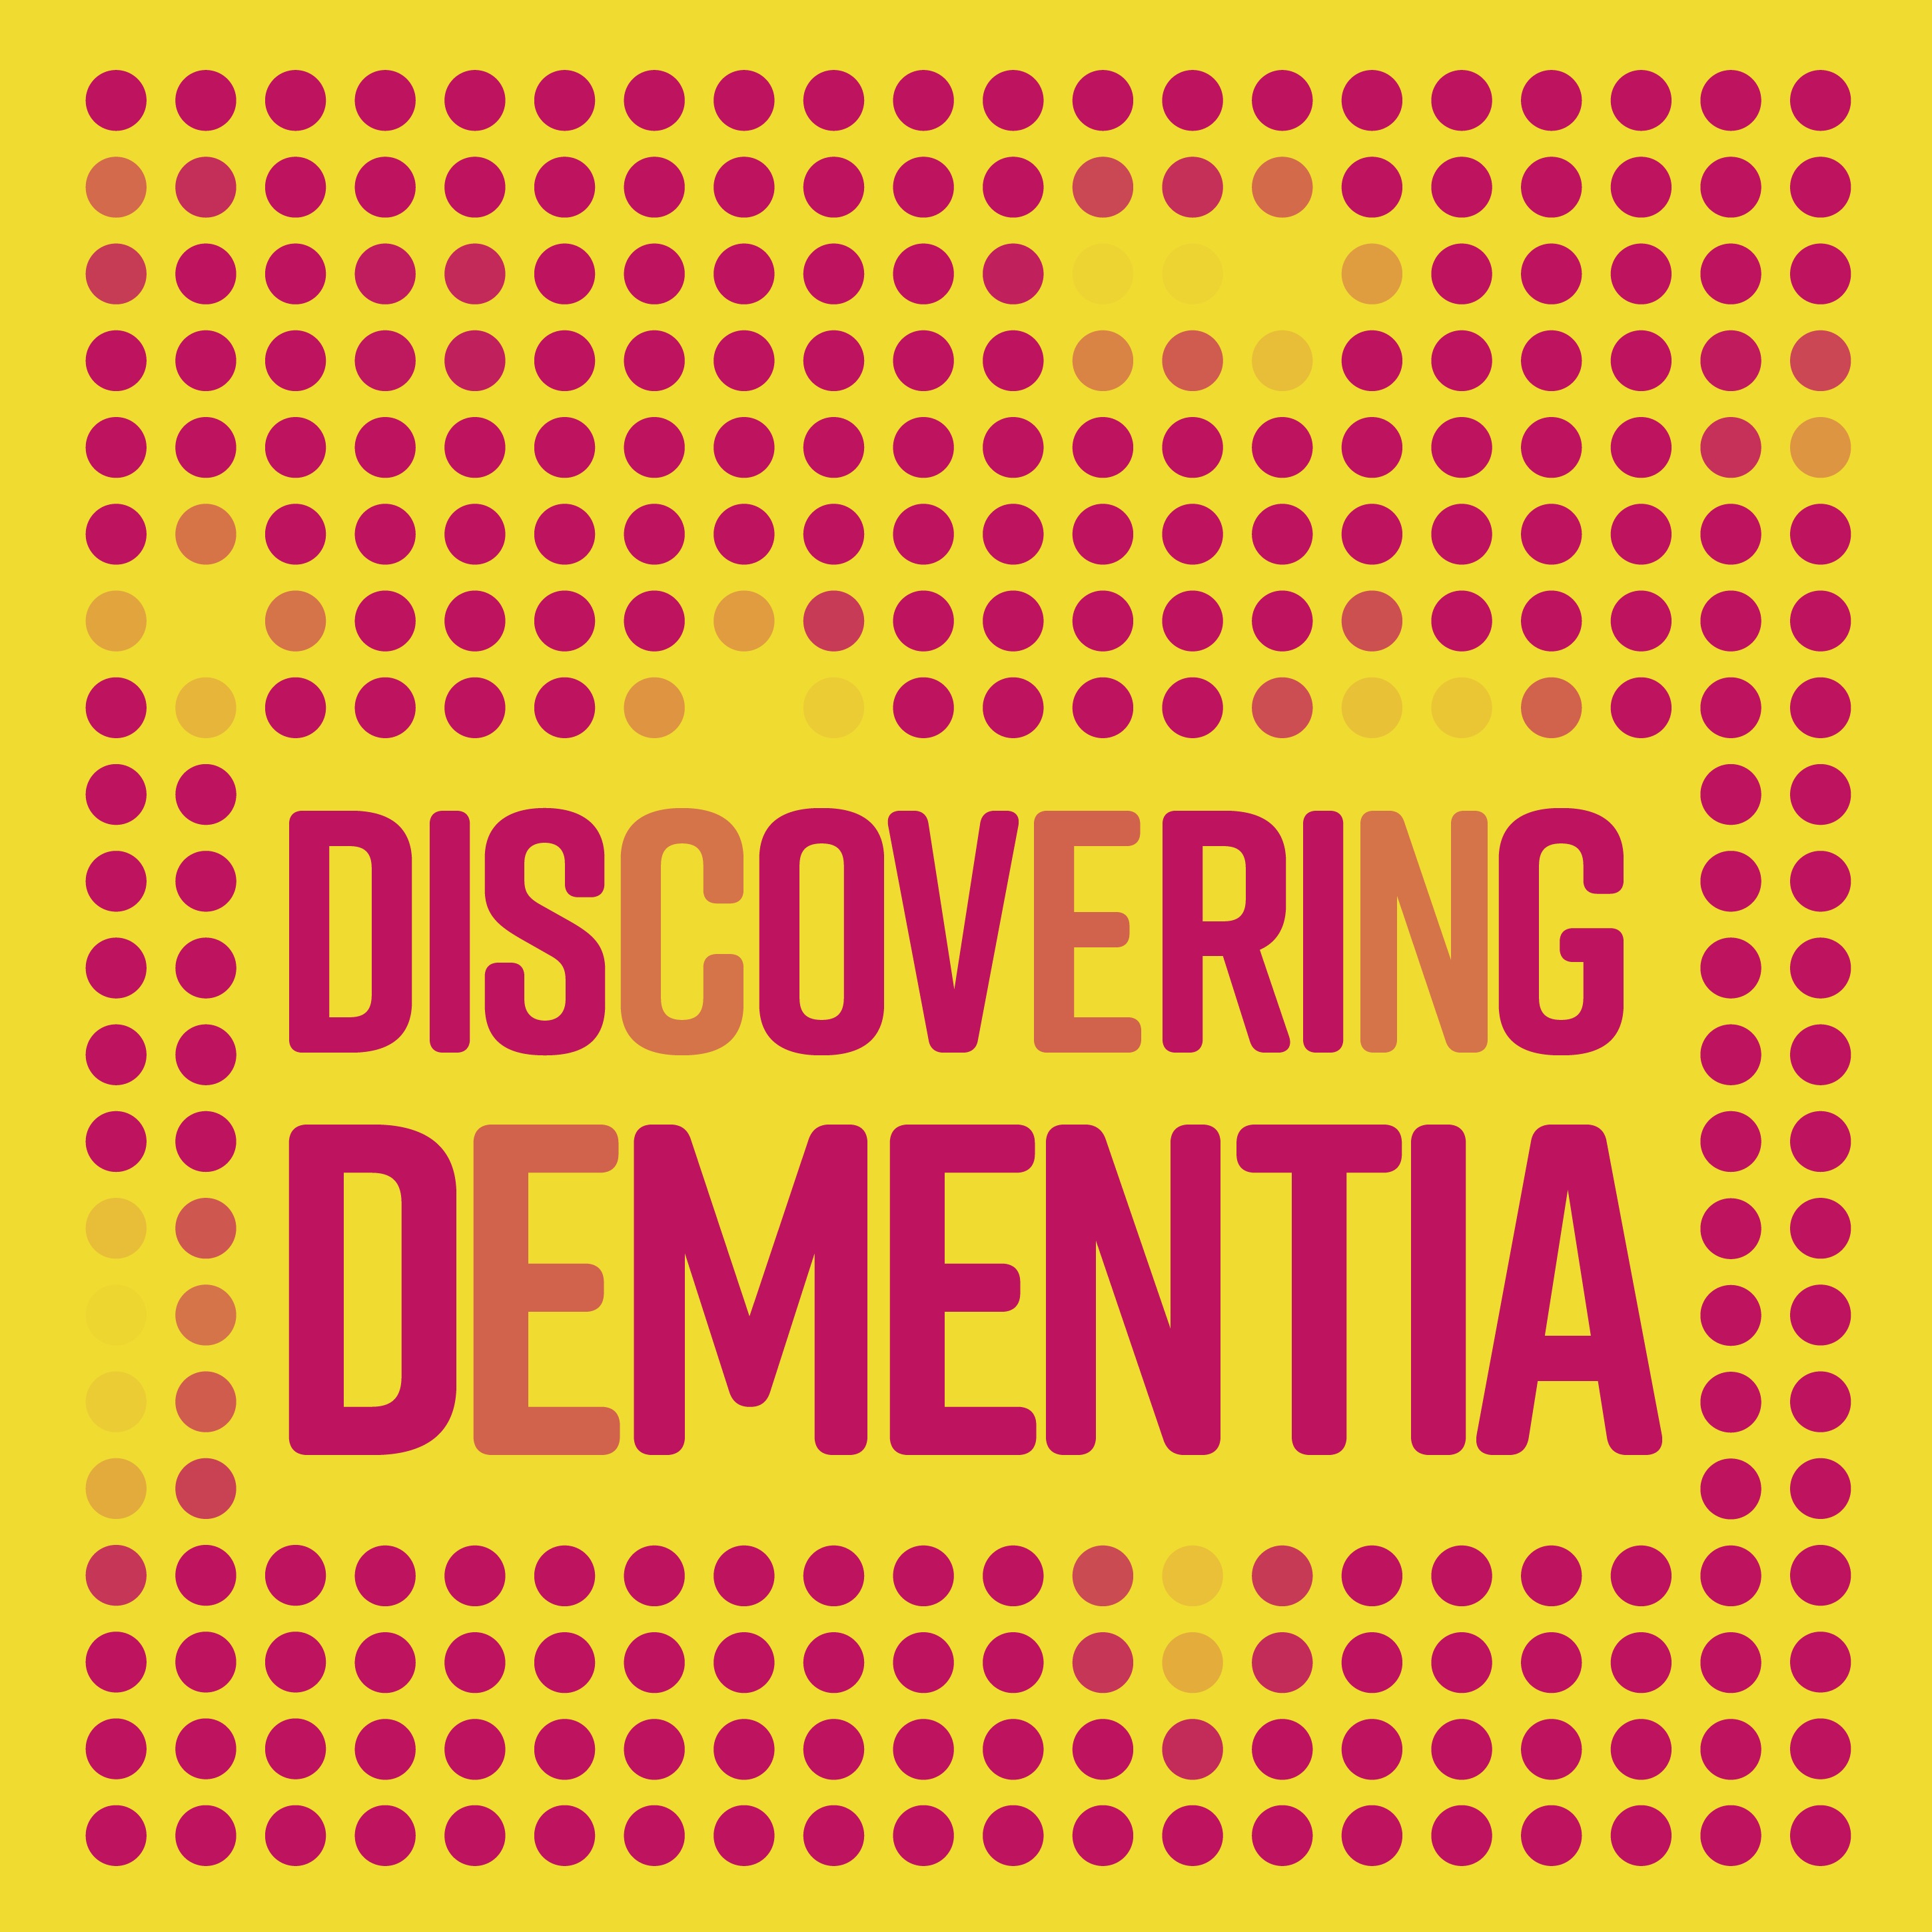 Discovering Dementia:Penny Bell